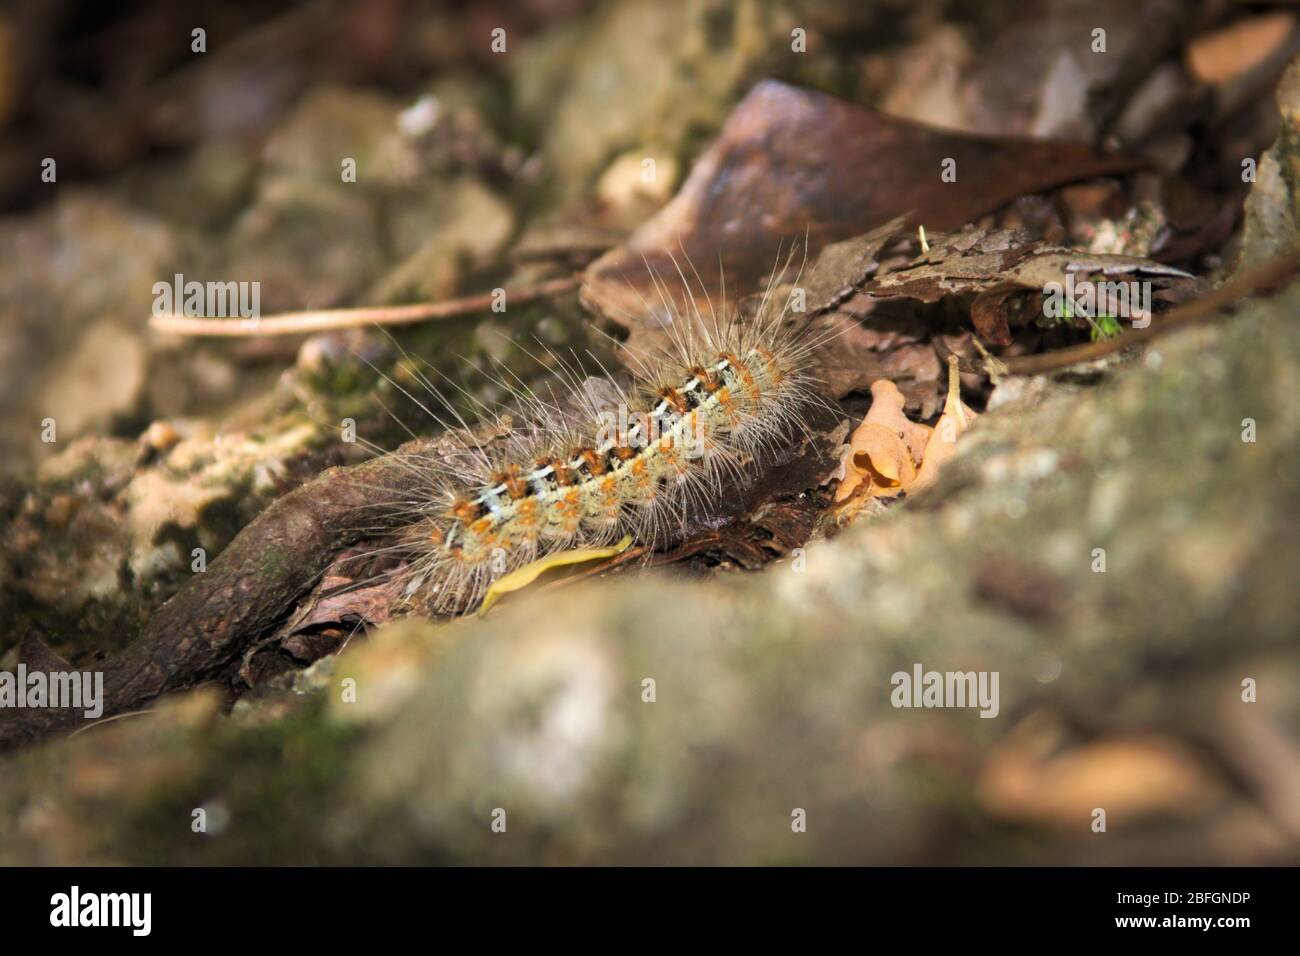 https://c8.alamy.com/comp/2BFGNDP/caterpillar-covered-in-urticating-hairs-as-a-defense-mechanism-spotted-in-a-forest-in-san-luis-argentina-2BFGNDP.jpg